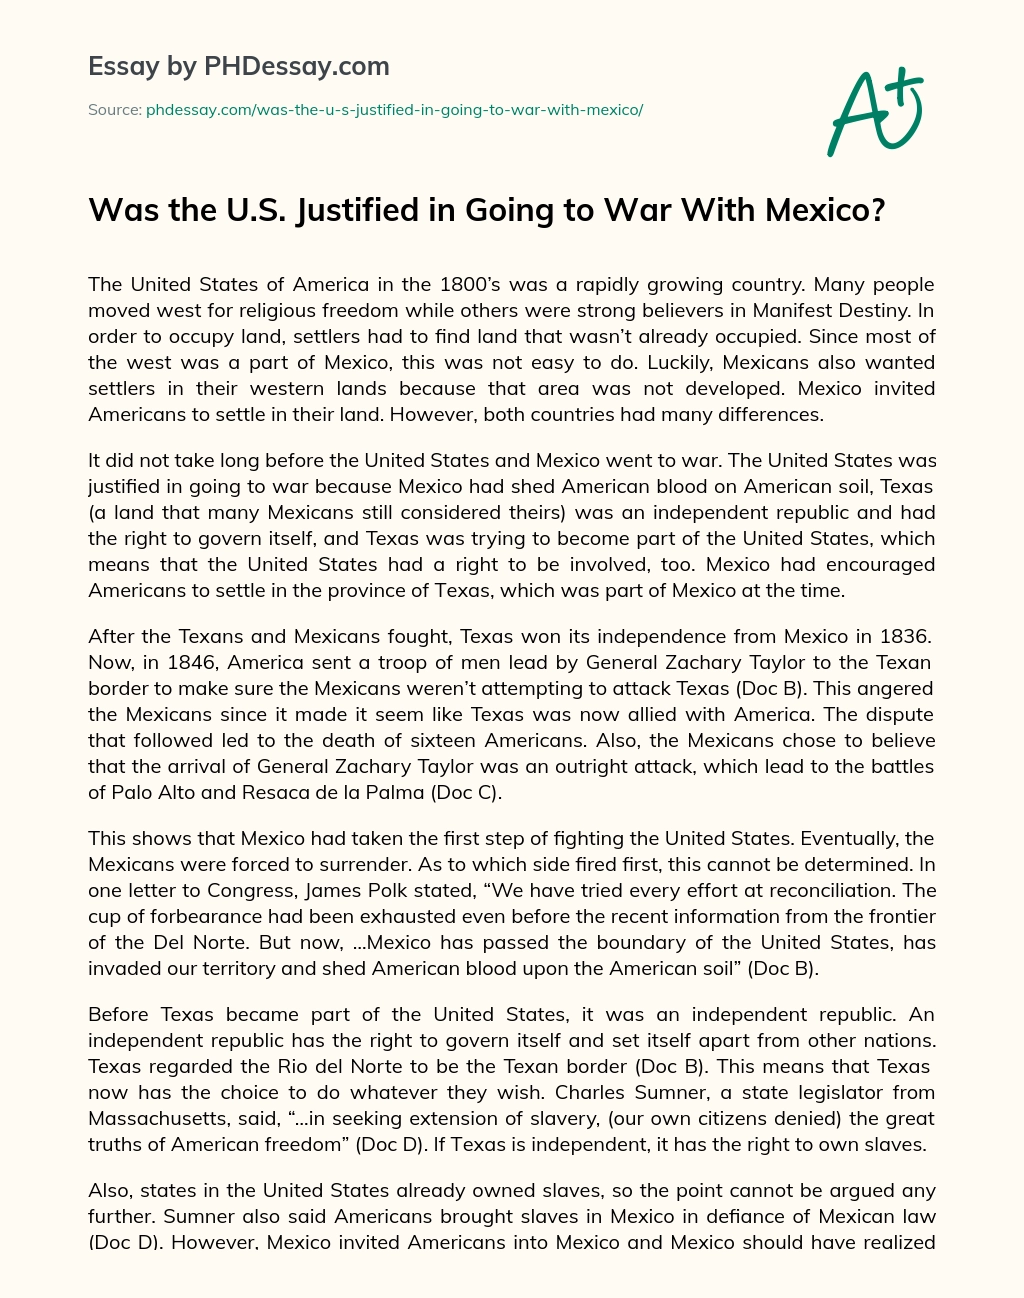 Was the U.S. Justified in Going to War With Mexico? essay